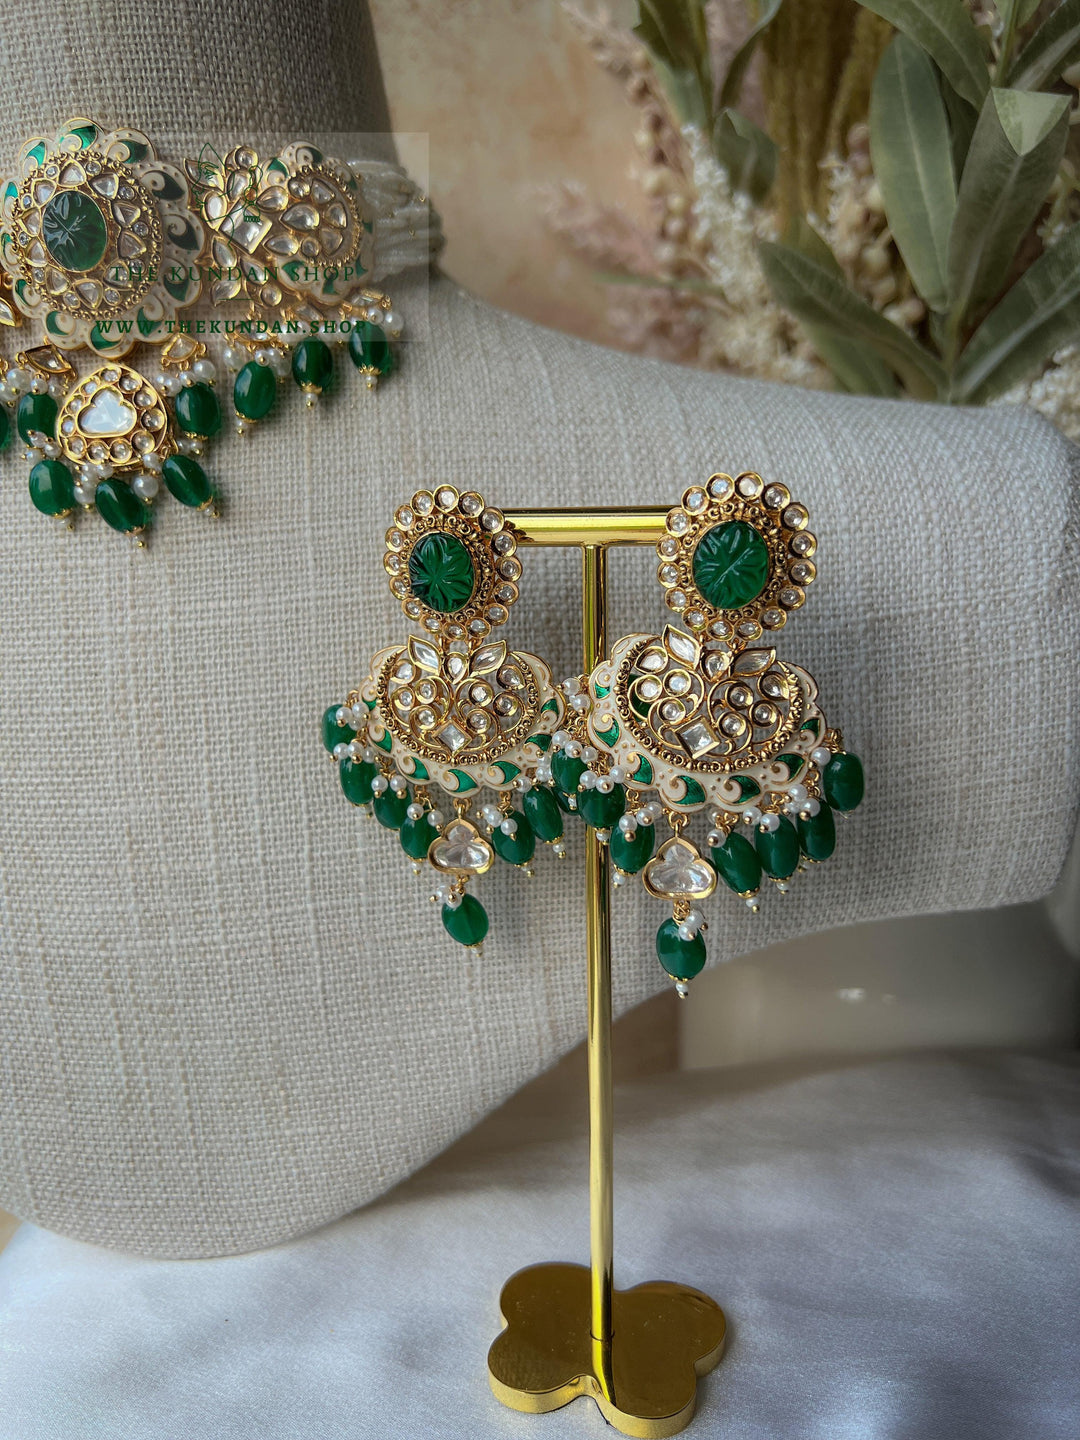 With Love in Green Necklace Sets THE KUNDAN SHOP 